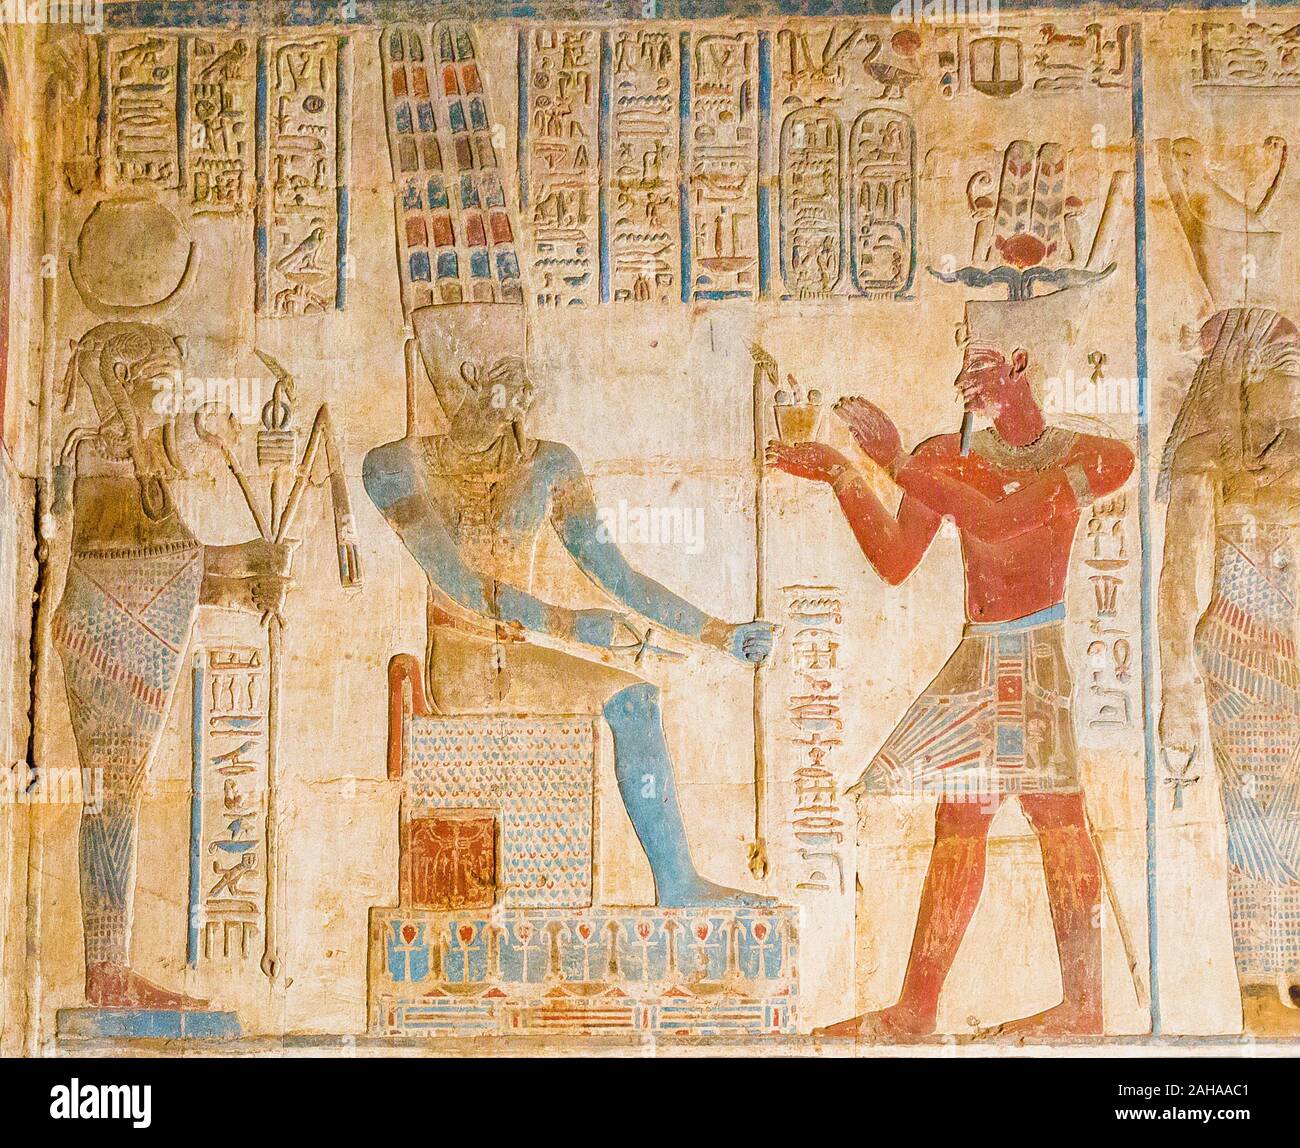 UNESCO World Heritage, Thebes in Egypt, Karnak site, ptolemaic temple of Opet. The king, wearing  a starched loincloth, censes god Amun. Stock Photo